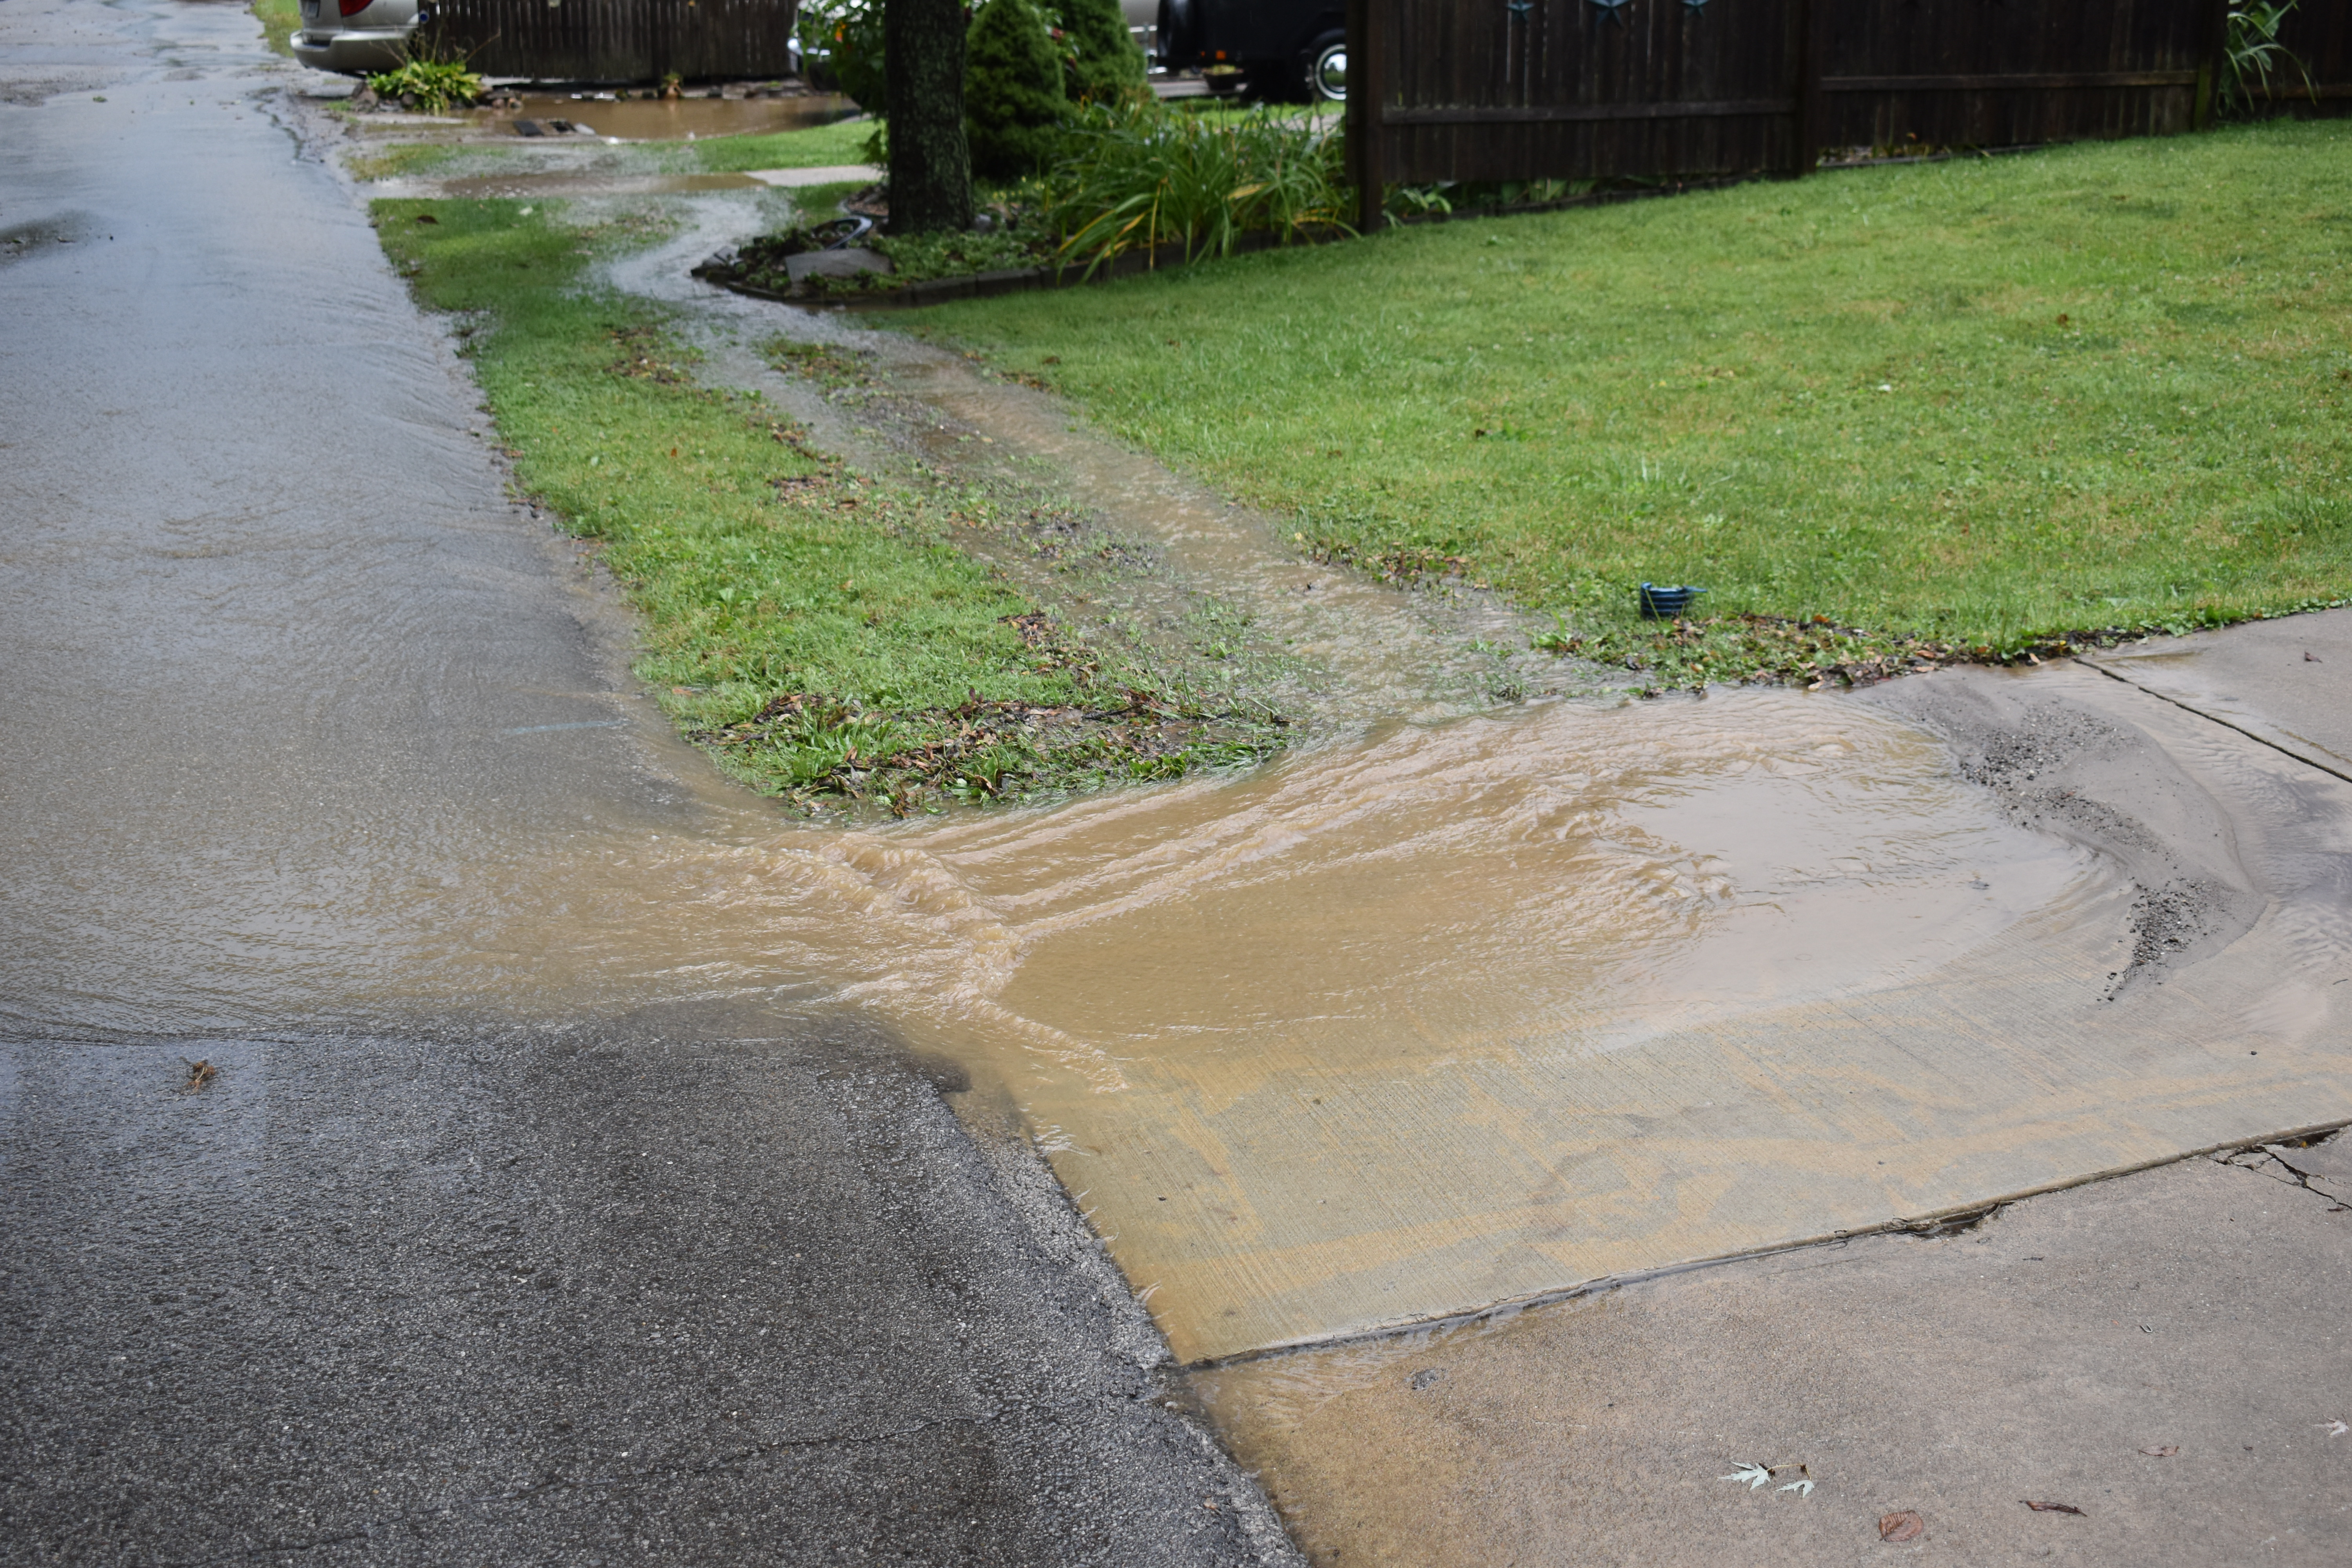 Water flows out of a storm drain on Rose Avenue.